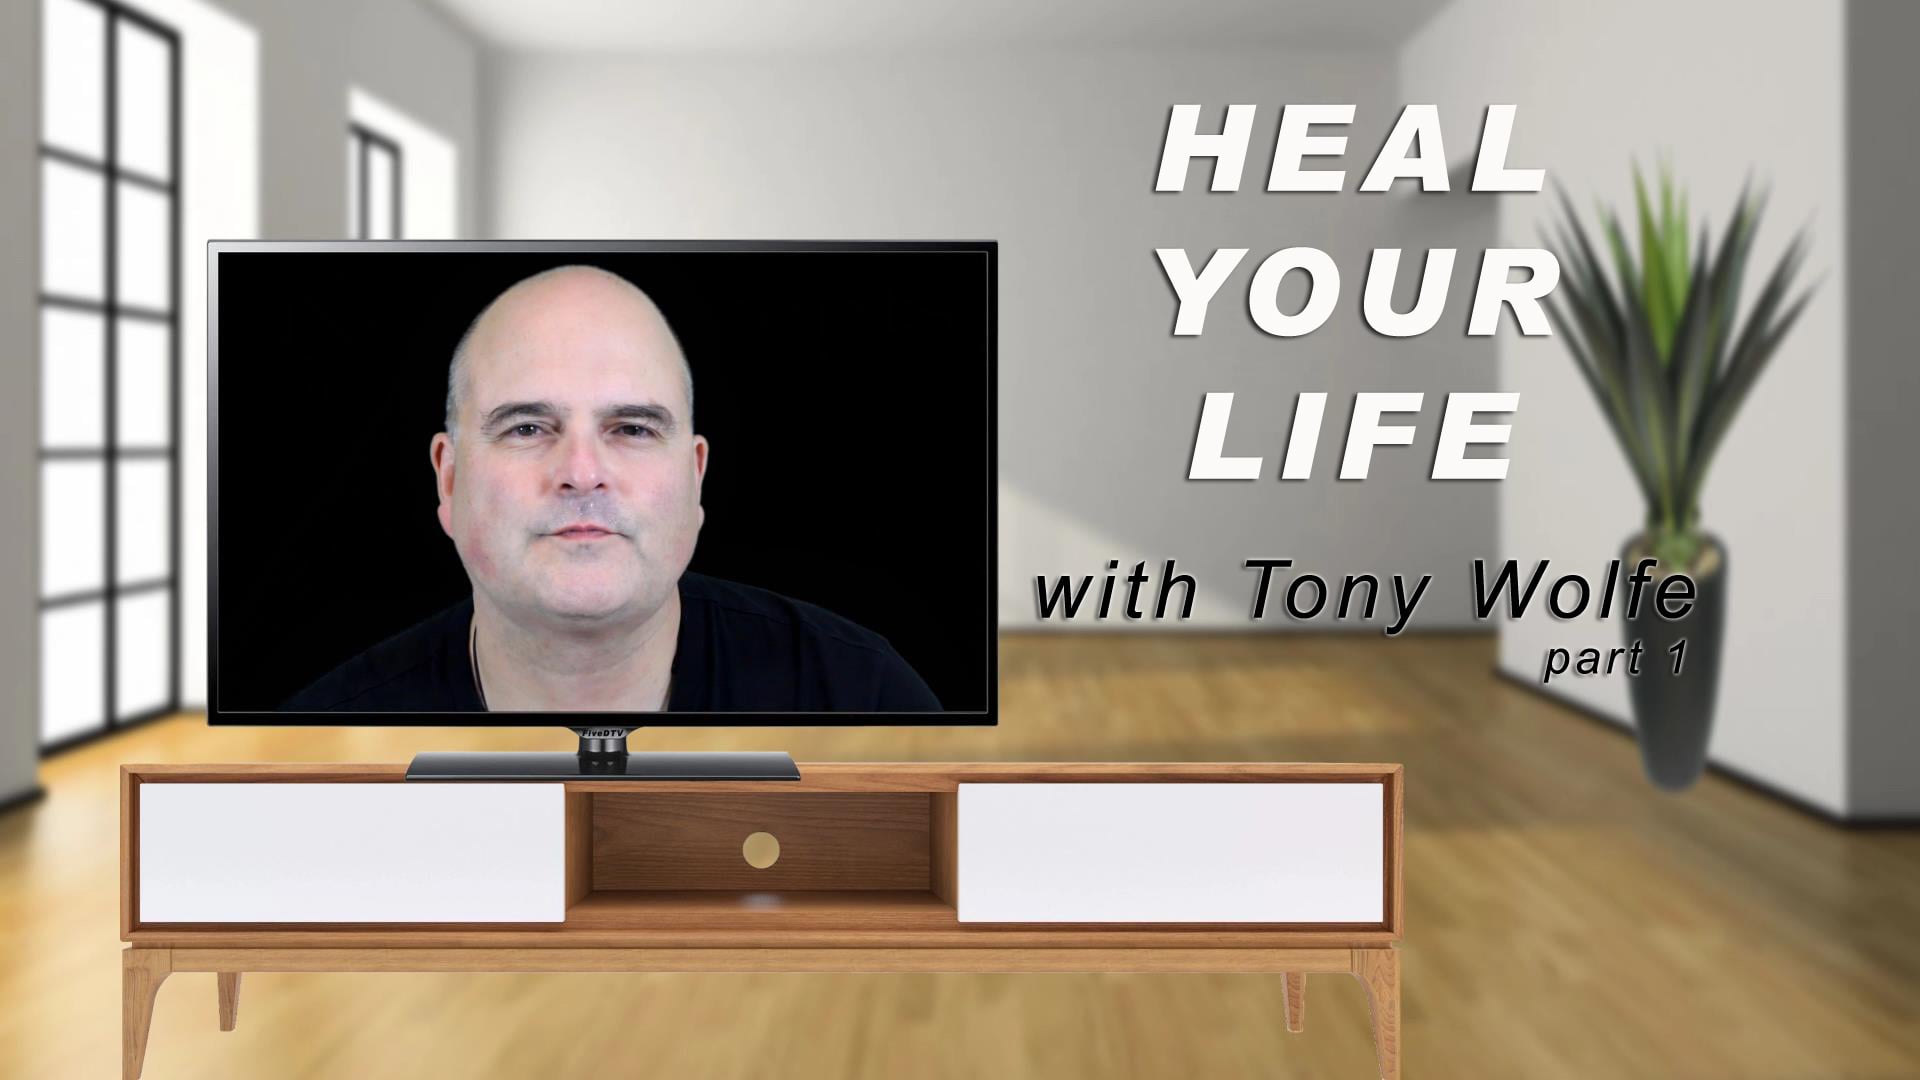 Part 1: Heal Your Life with Tony Wolfe